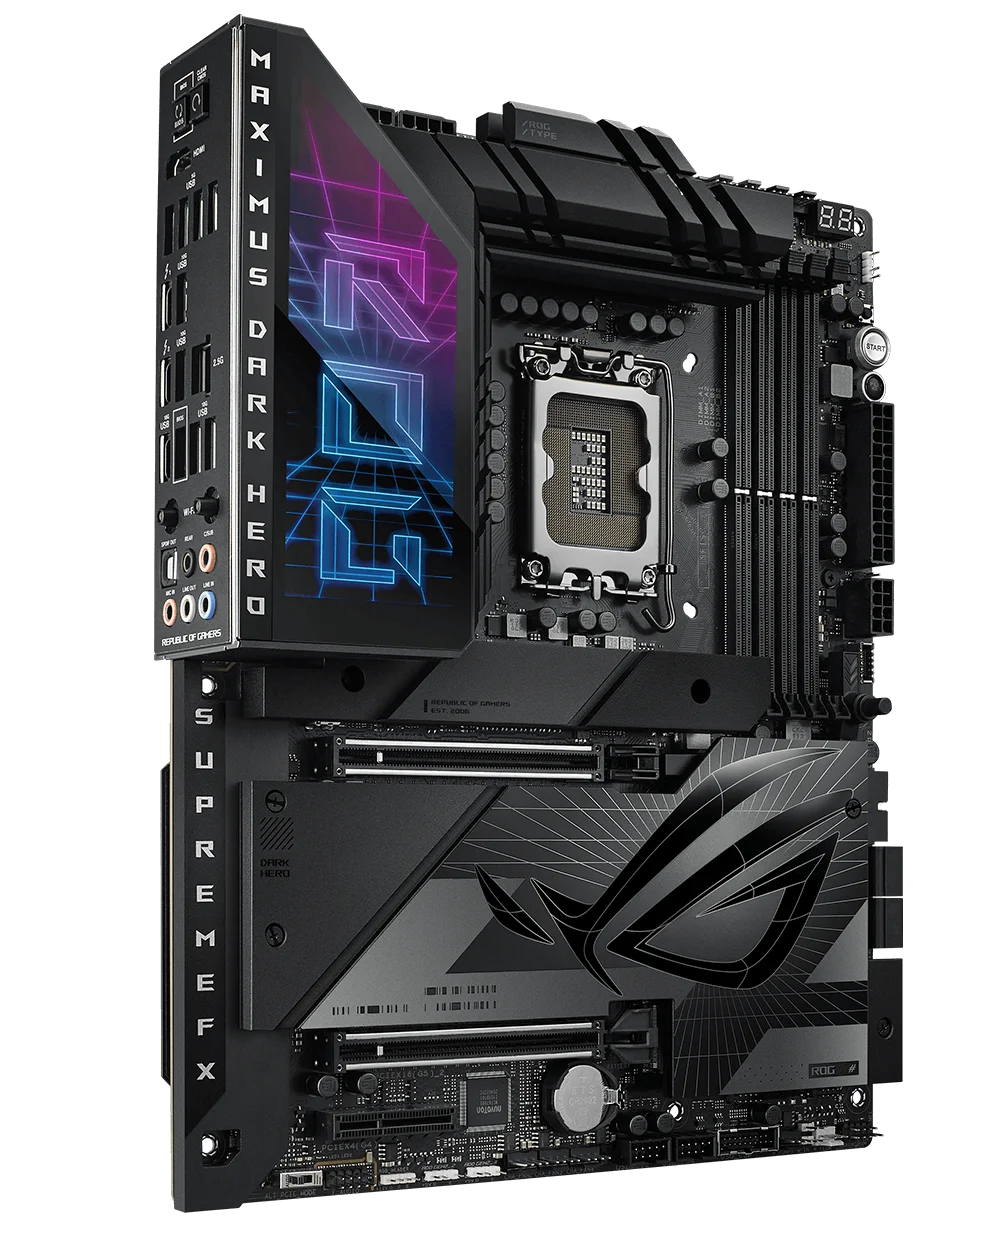 Image with ROG Maximus Z790 Hero motherboard to showcase the connectivity of PCIe 5.0, USB4, WIFI and LAN supports